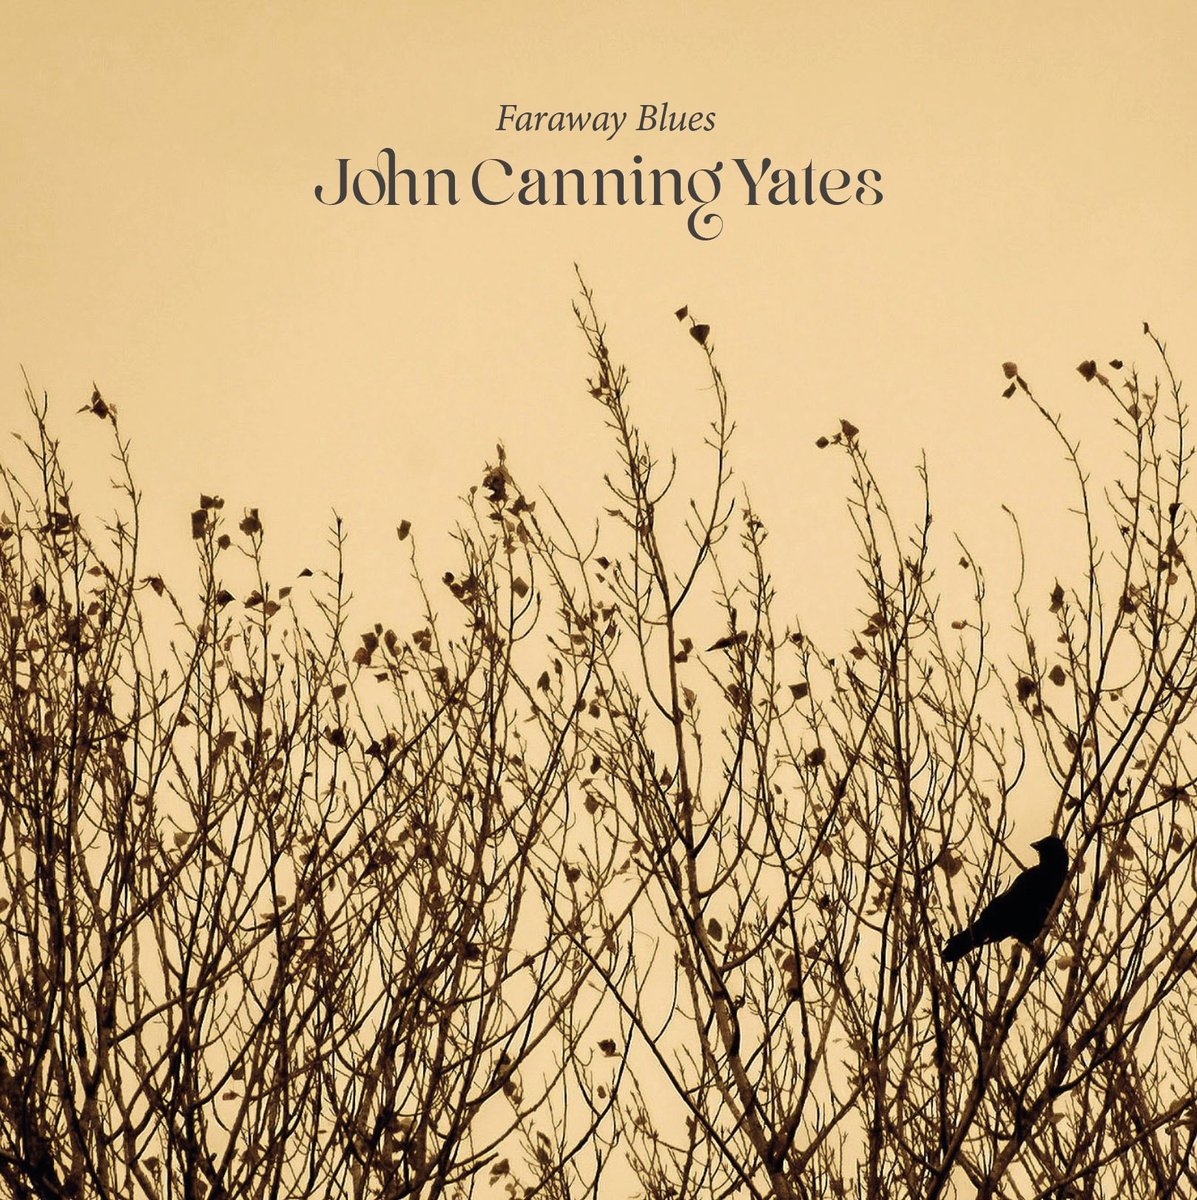 NEWS!: (x3) ‘Faraway Blues’, the new single is out now!! Stream: songwhip.com/johncanningyat… My album ‘The Quiet Portraits’ is released next Friday! (19th April) Order: violetterecords.com/store/p/john-c… Launch gig with Beatowls following Friday (26th April) Tickets: tickettailor.com/events/violett…